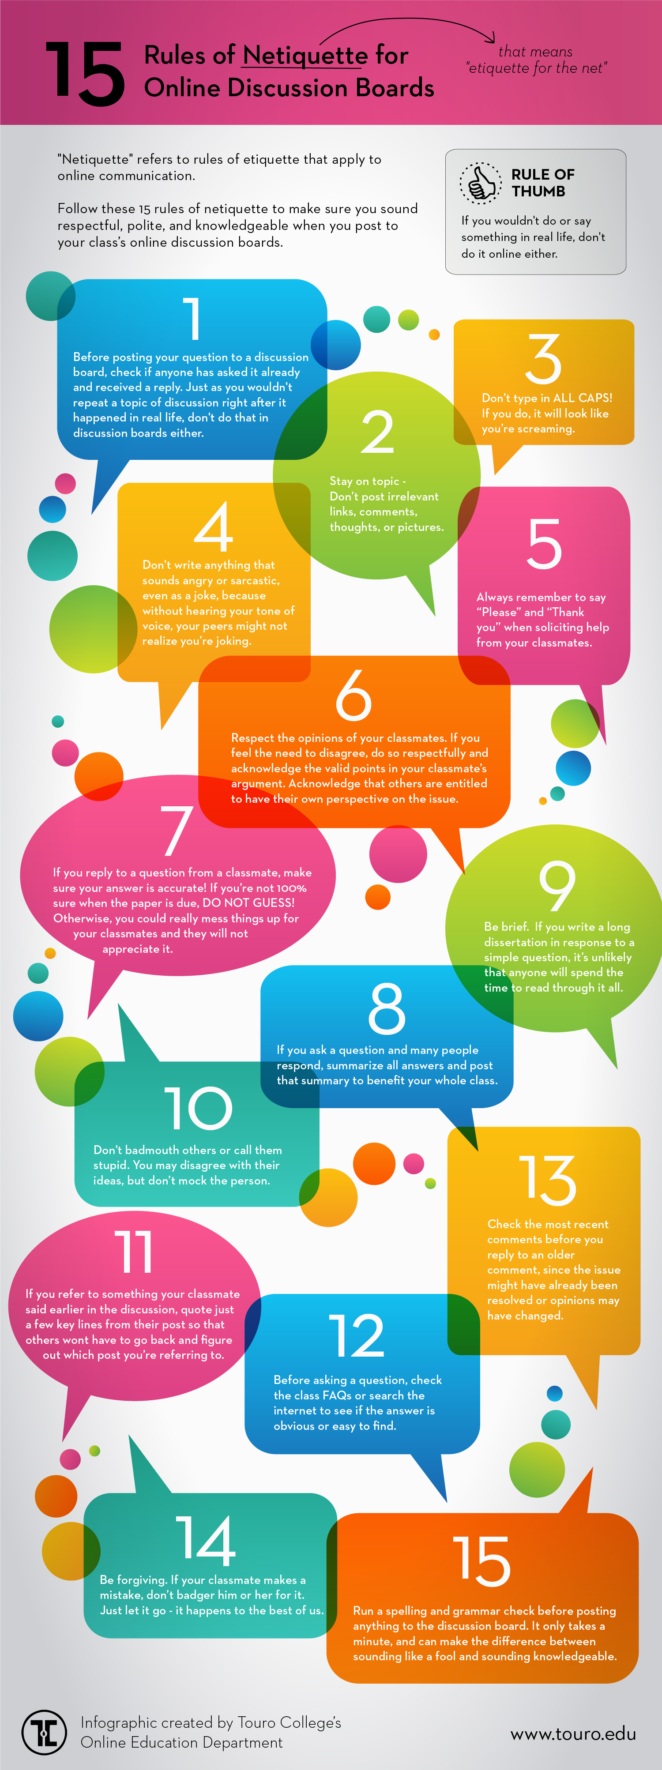 15 Rules of Online Netiquette Infographic